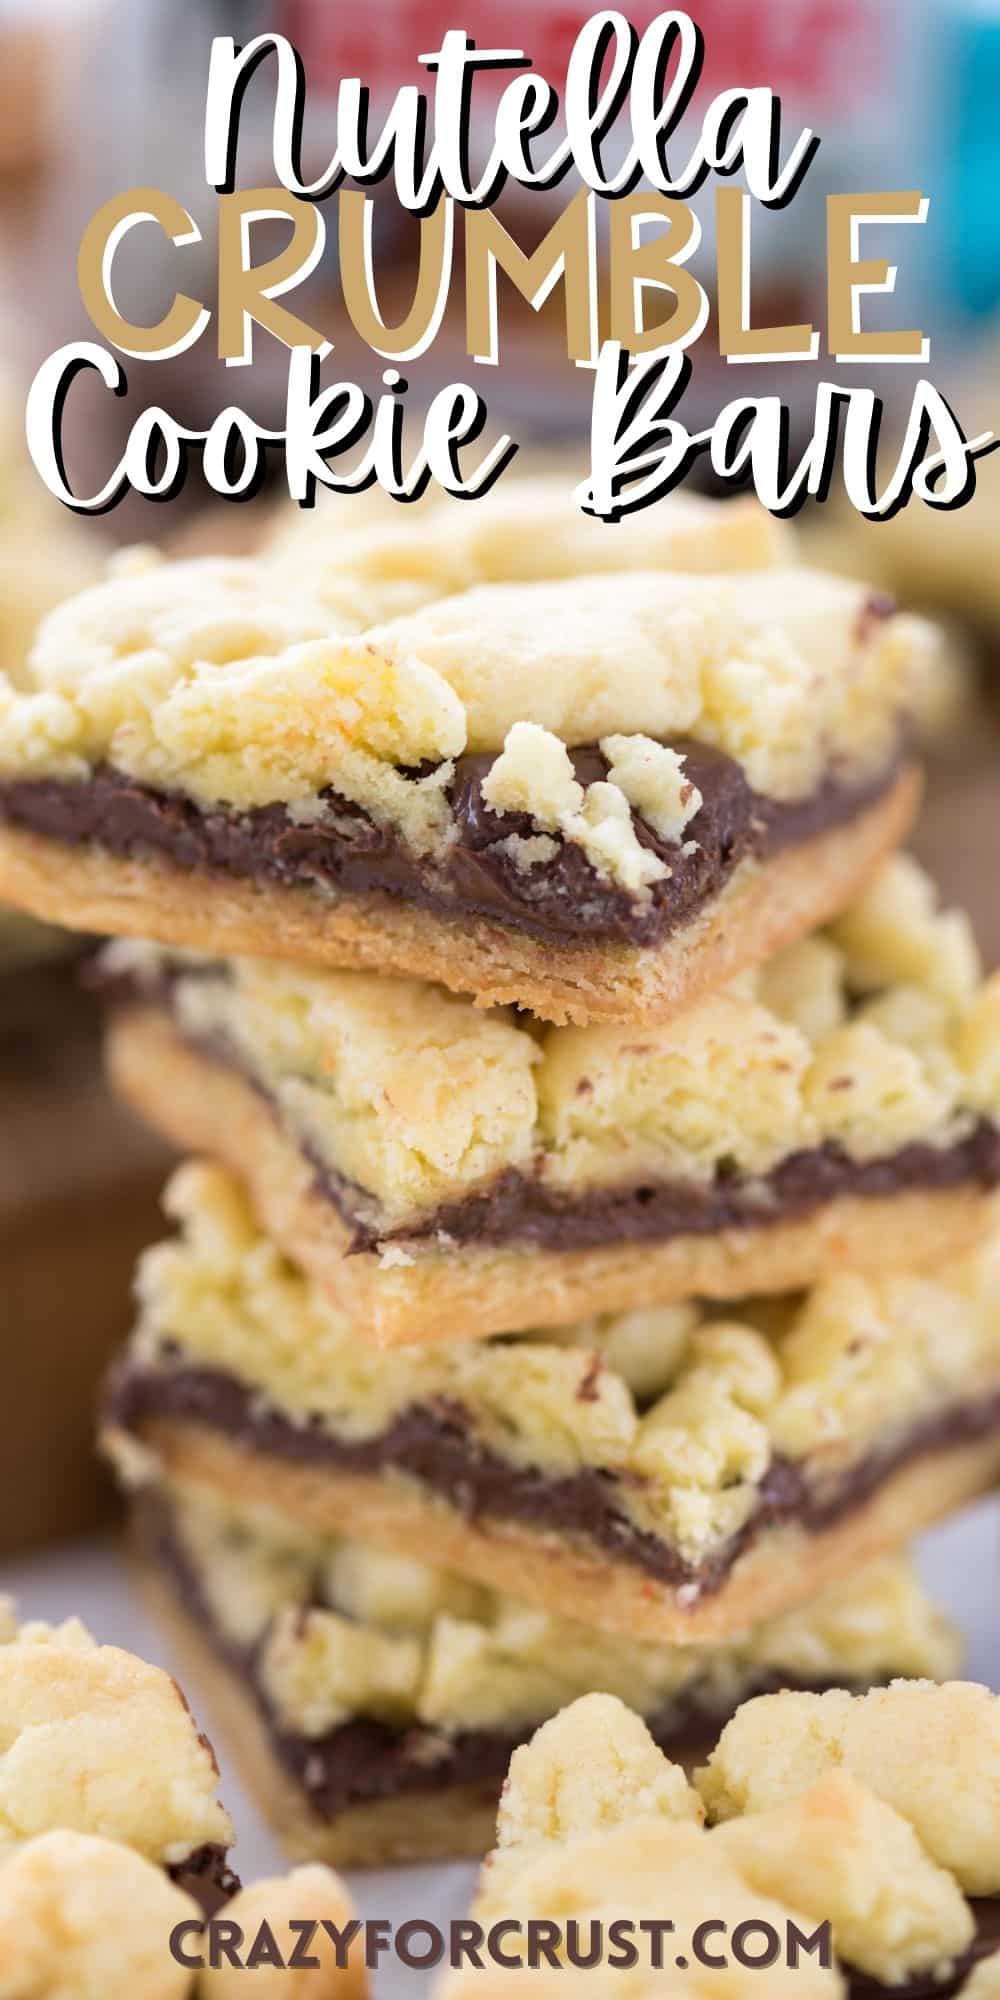 stacked crumble bars with nutella in the middle with words on top